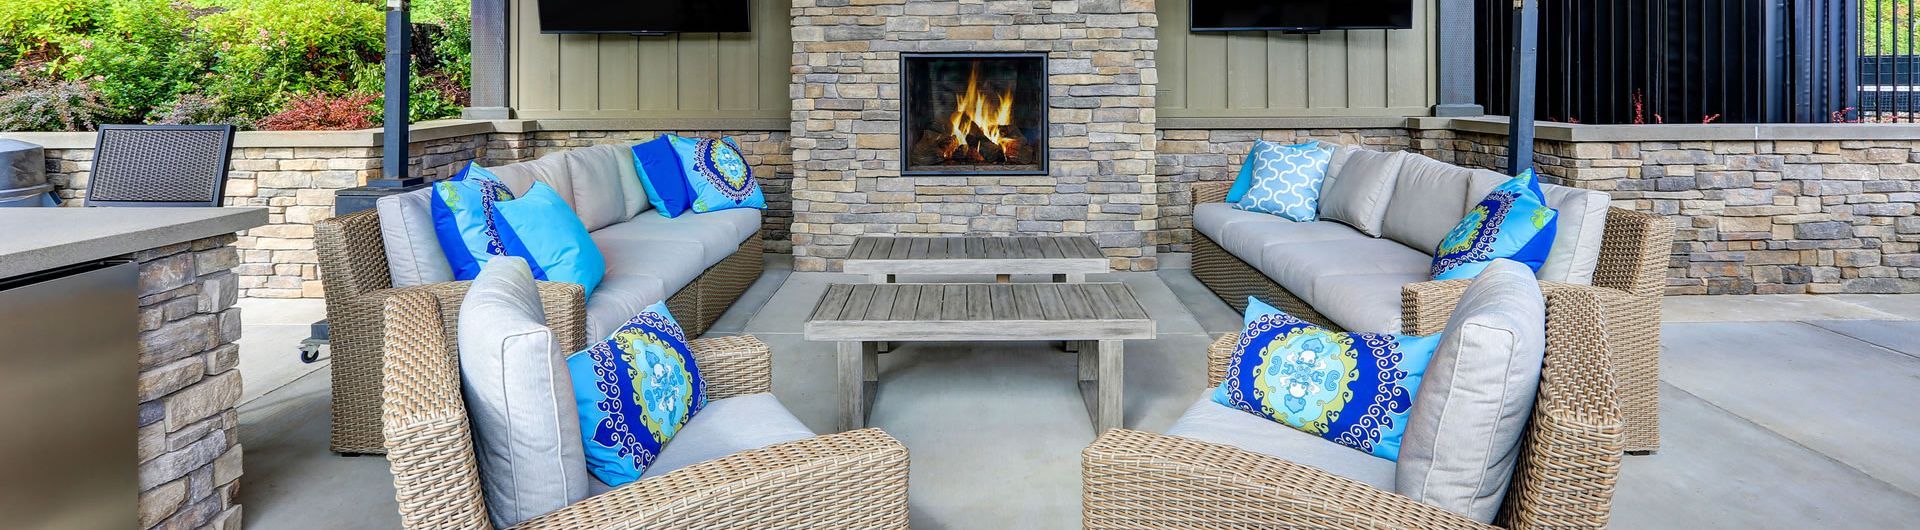 patio setting with fireplace